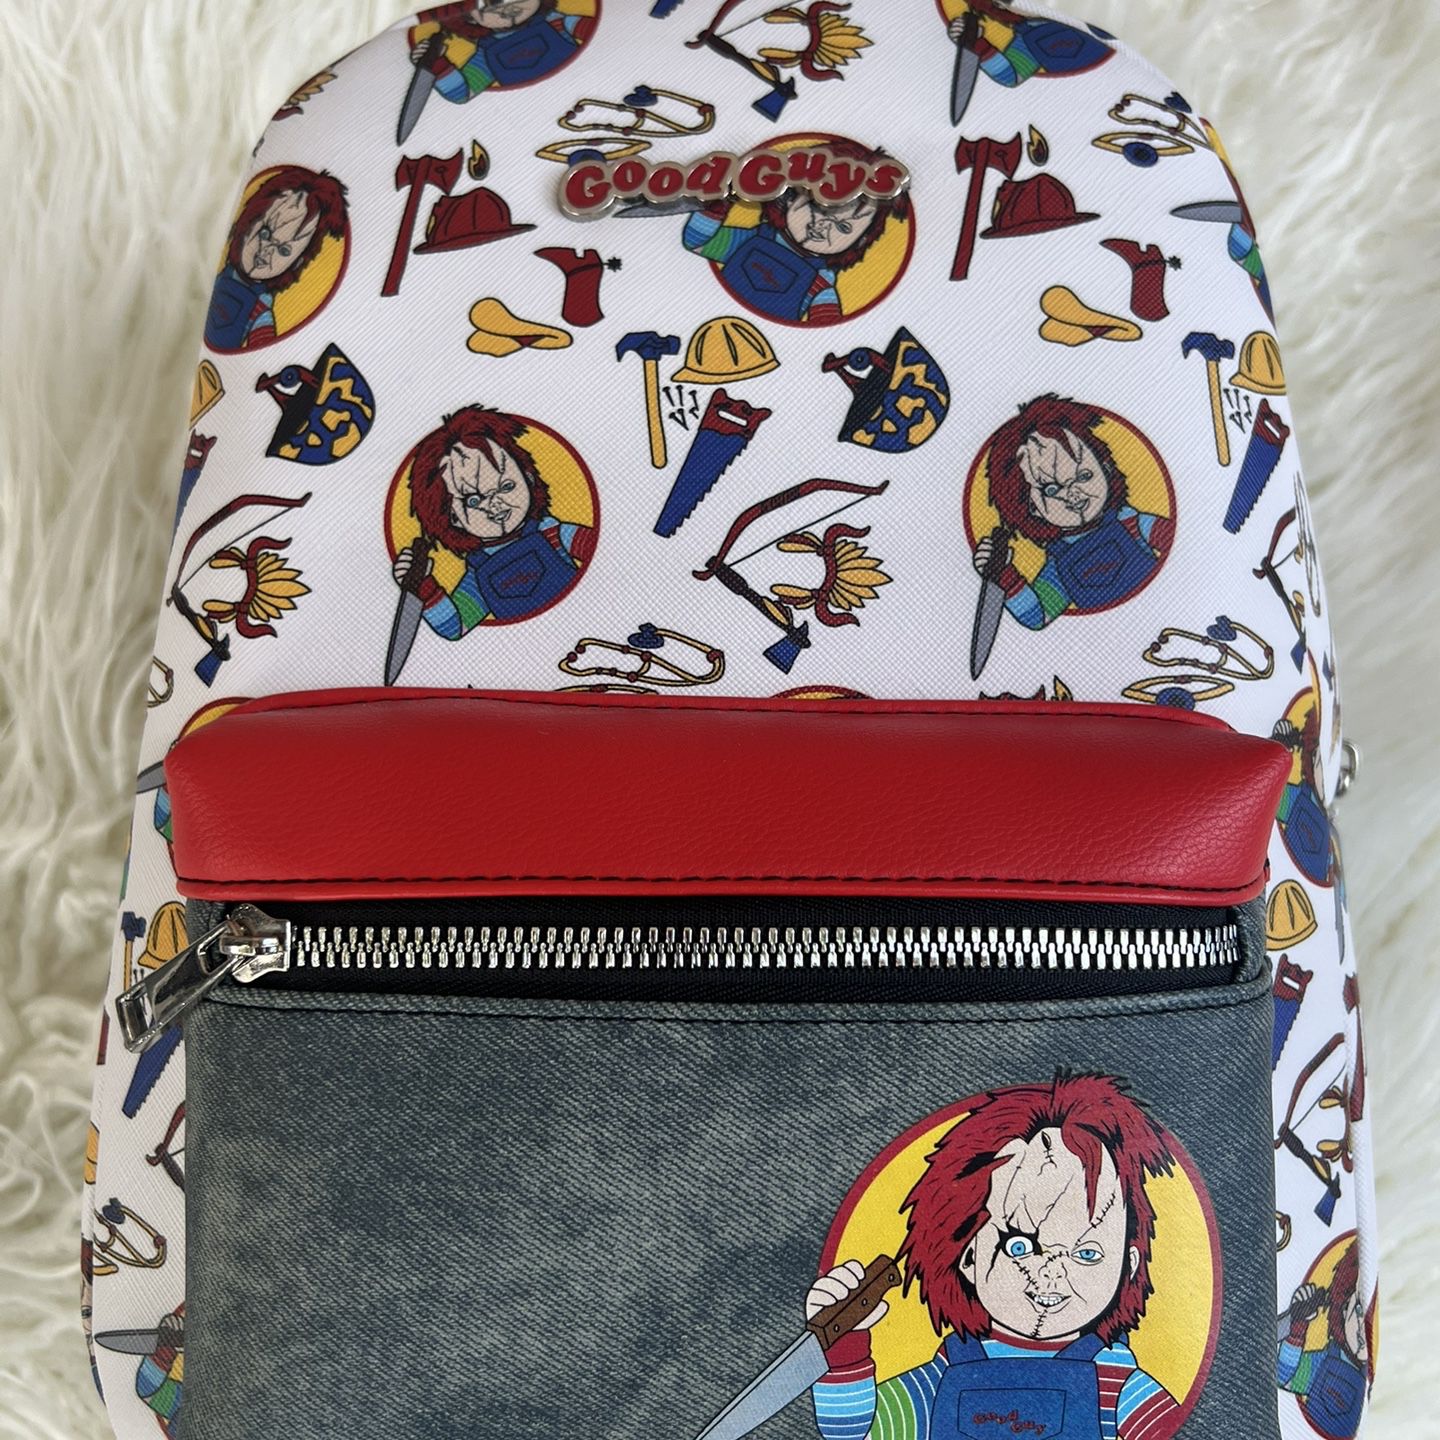 GoodGuys Mini Backpack for Sale in San Leandro, CA - OfferUp